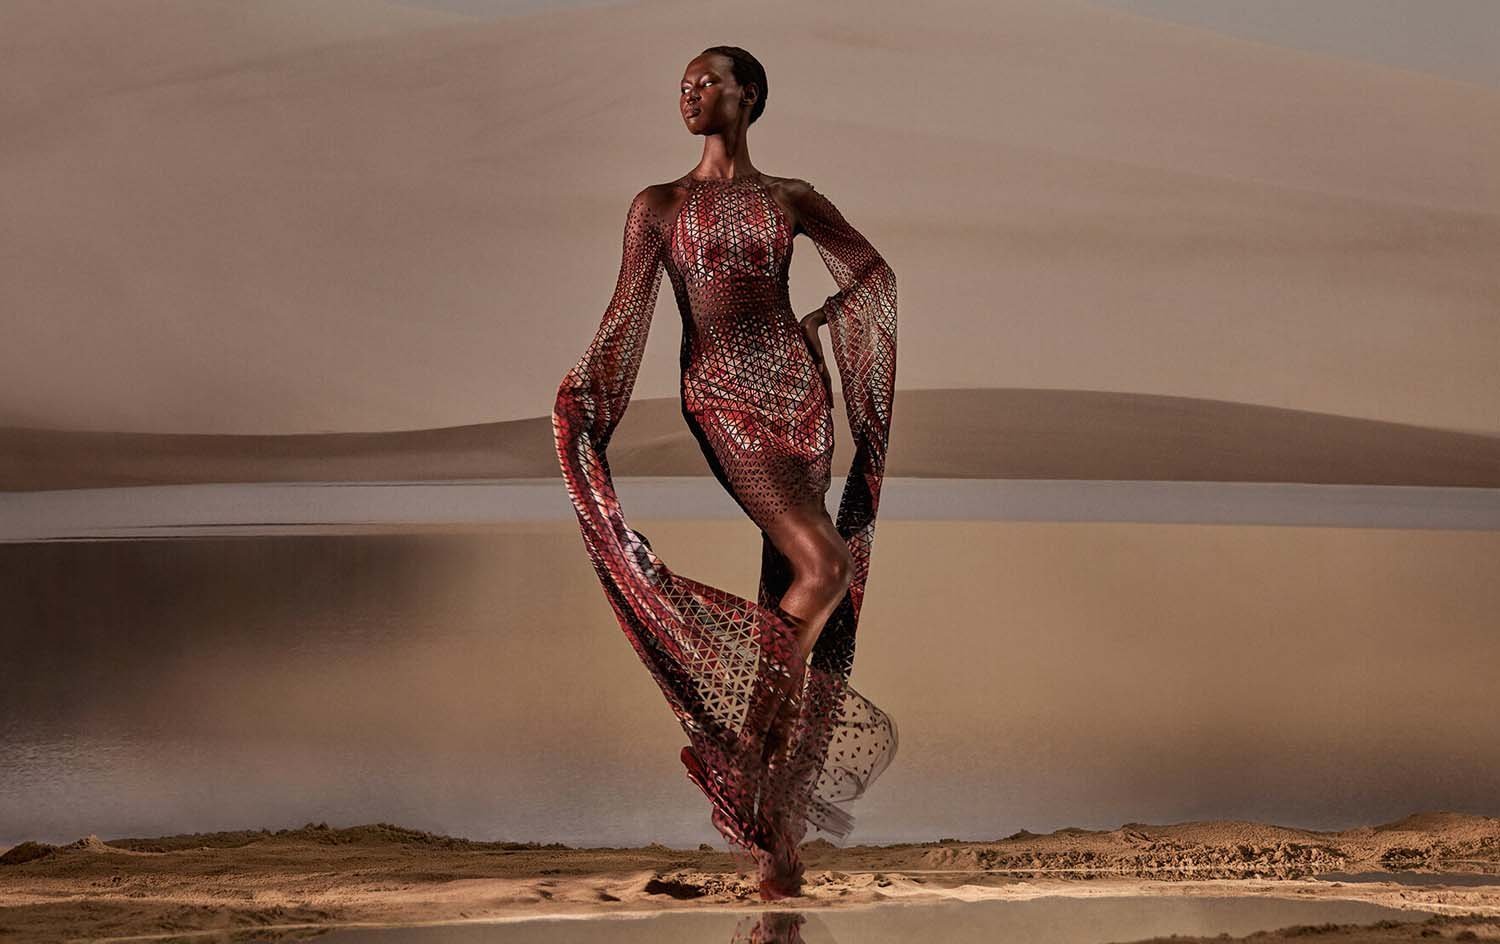   Holobiont  dress by Iris van Herpen, from the  Roots of Rebirth  collection 